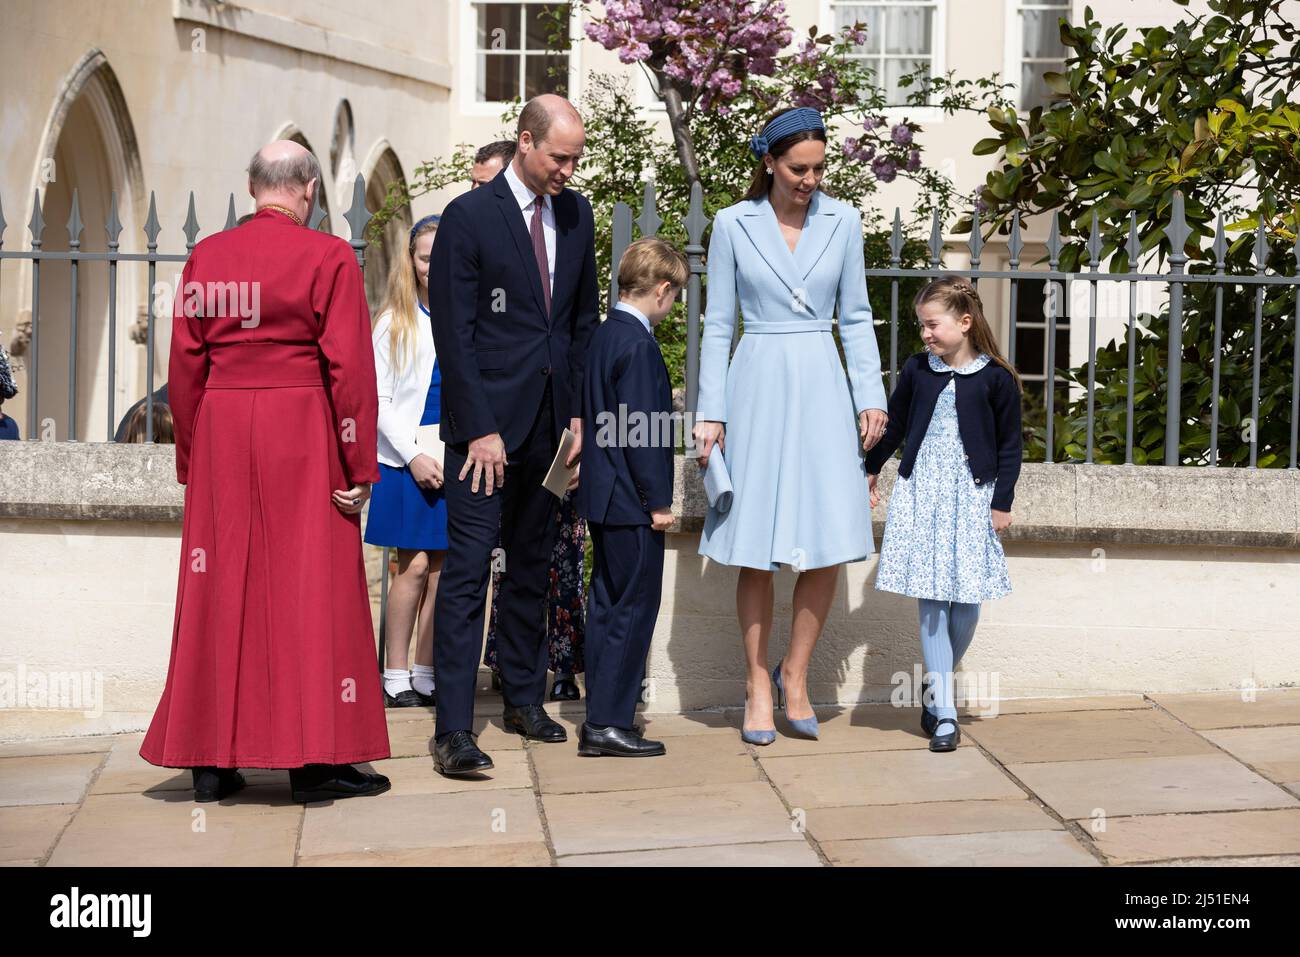 Duke and Duchess of Cambridge with members of the Royal Family attend the Easter Service at St George's Chapel, Windsor Castle, Berkshire, England, UK Stock Photo